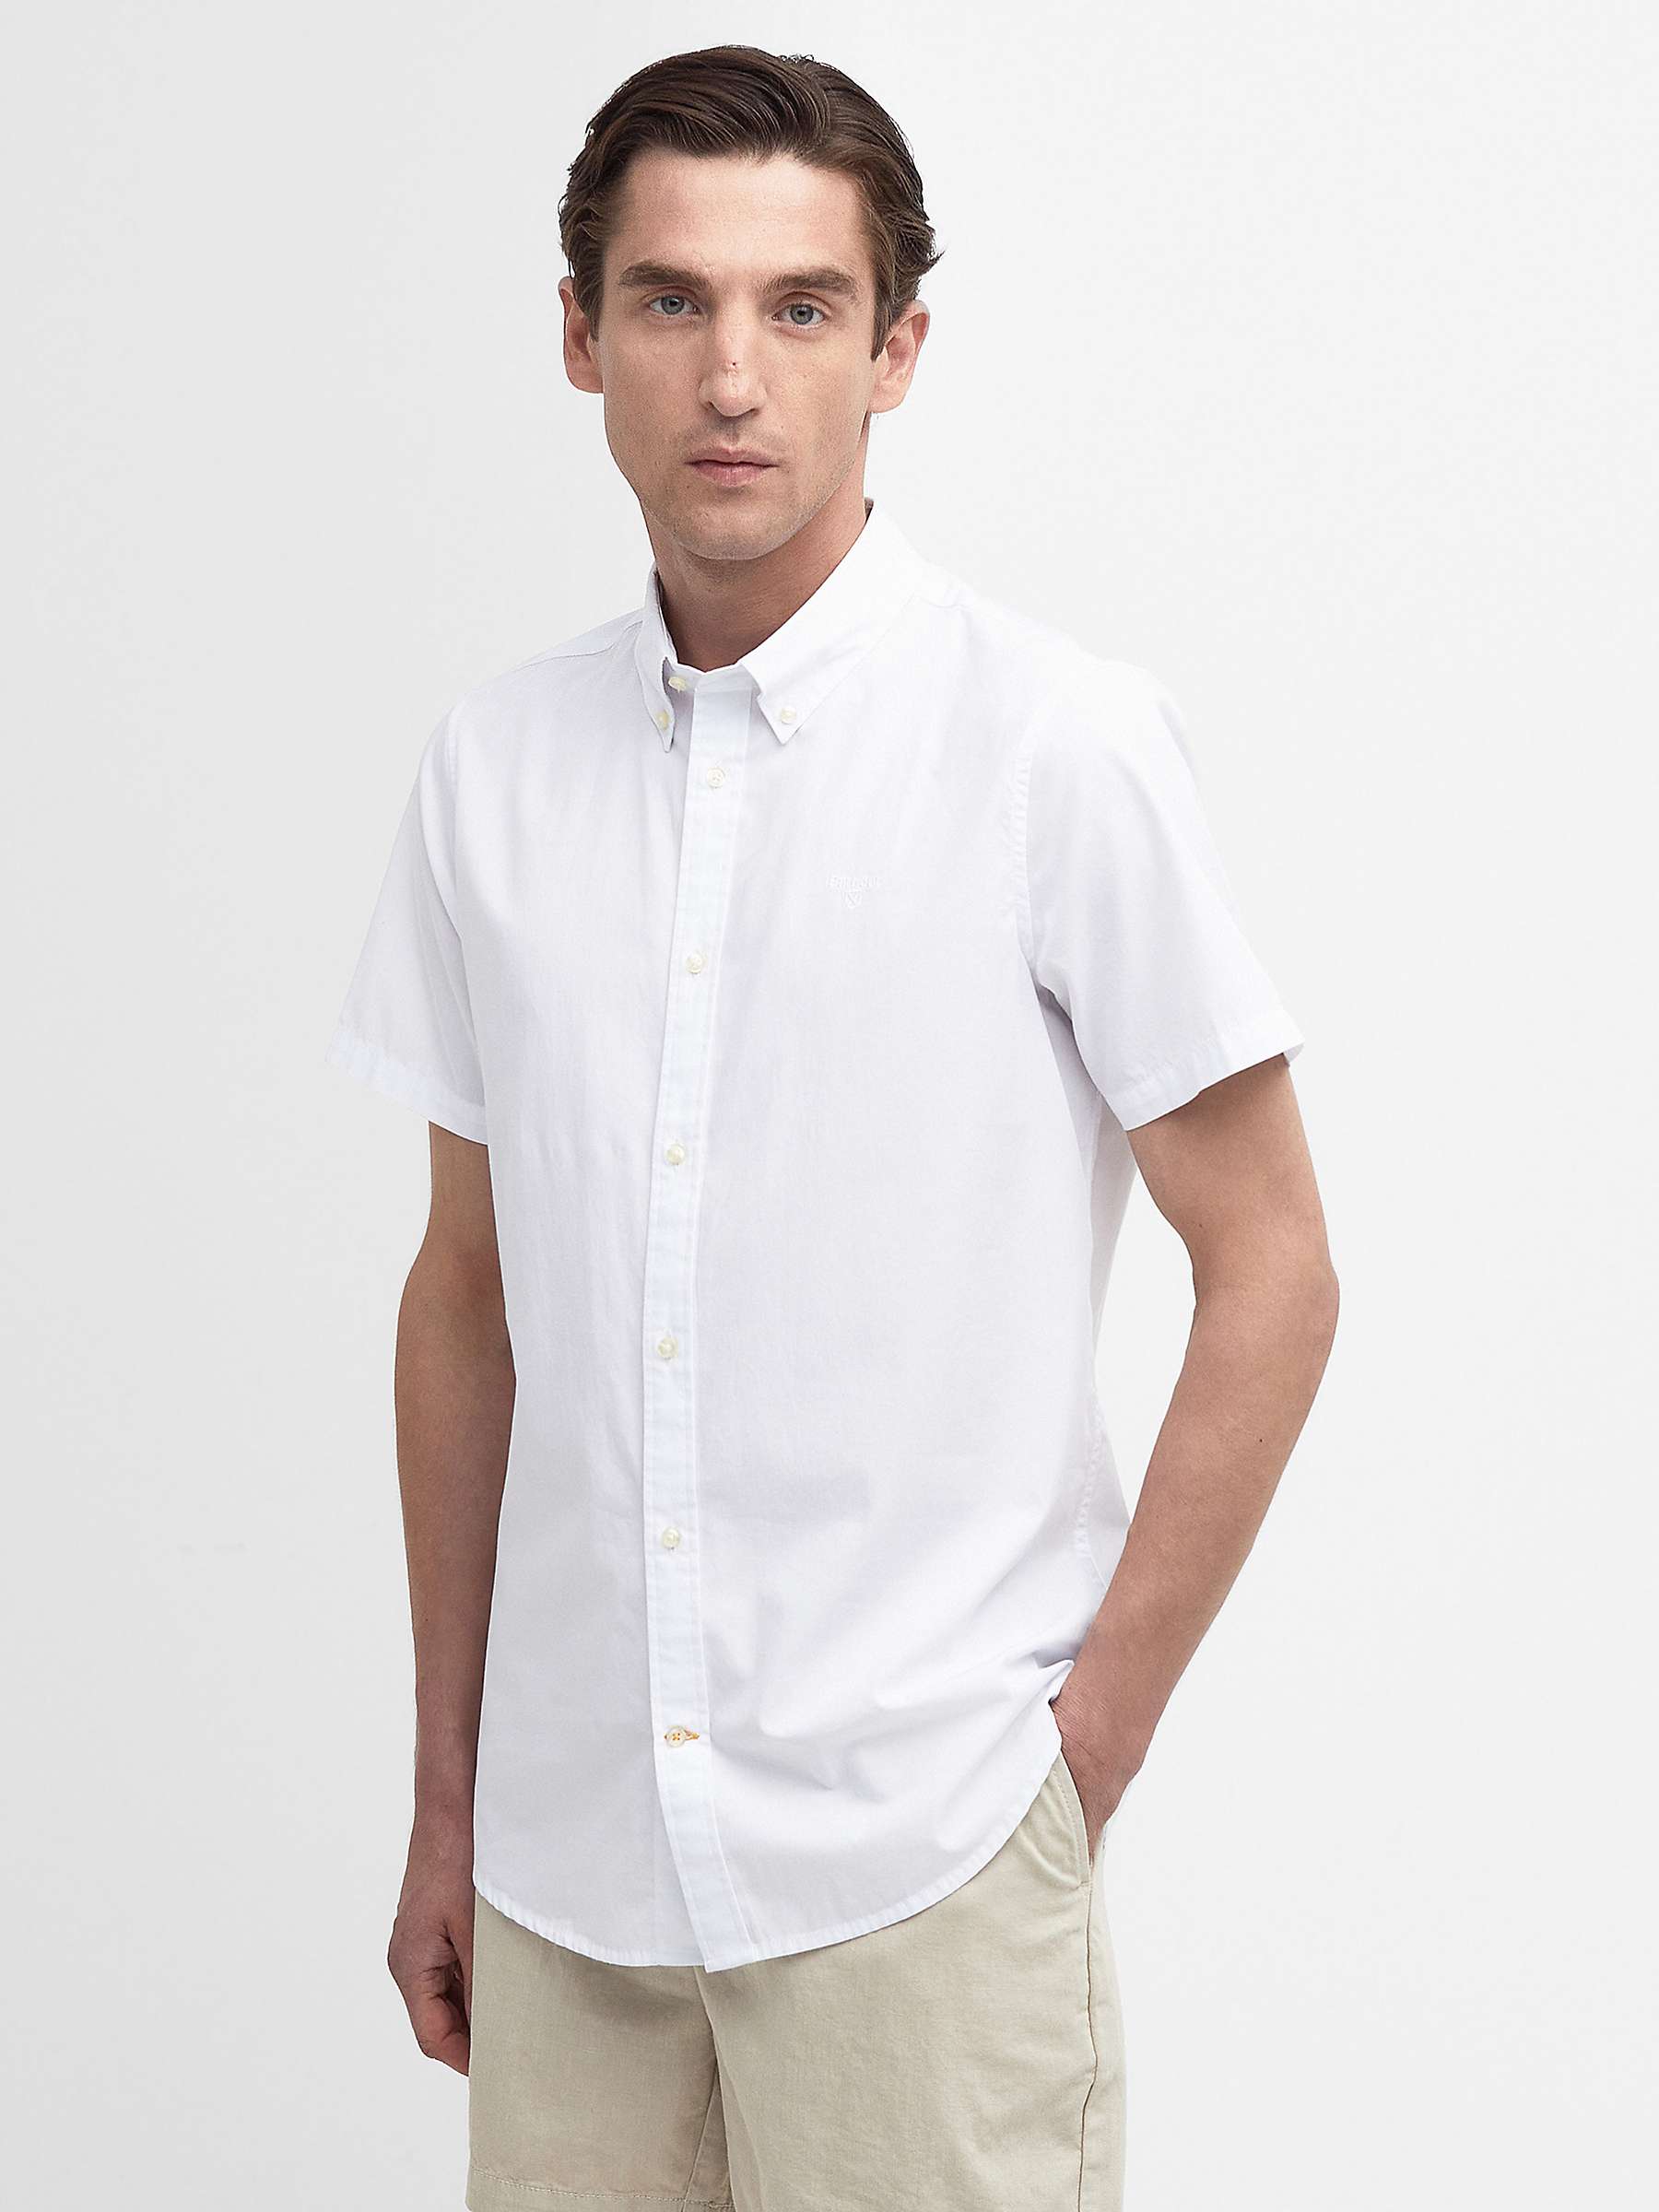 Buy Barbour Cotton Short Sleeve Tailored Shirt, White Online at johnlewis.com